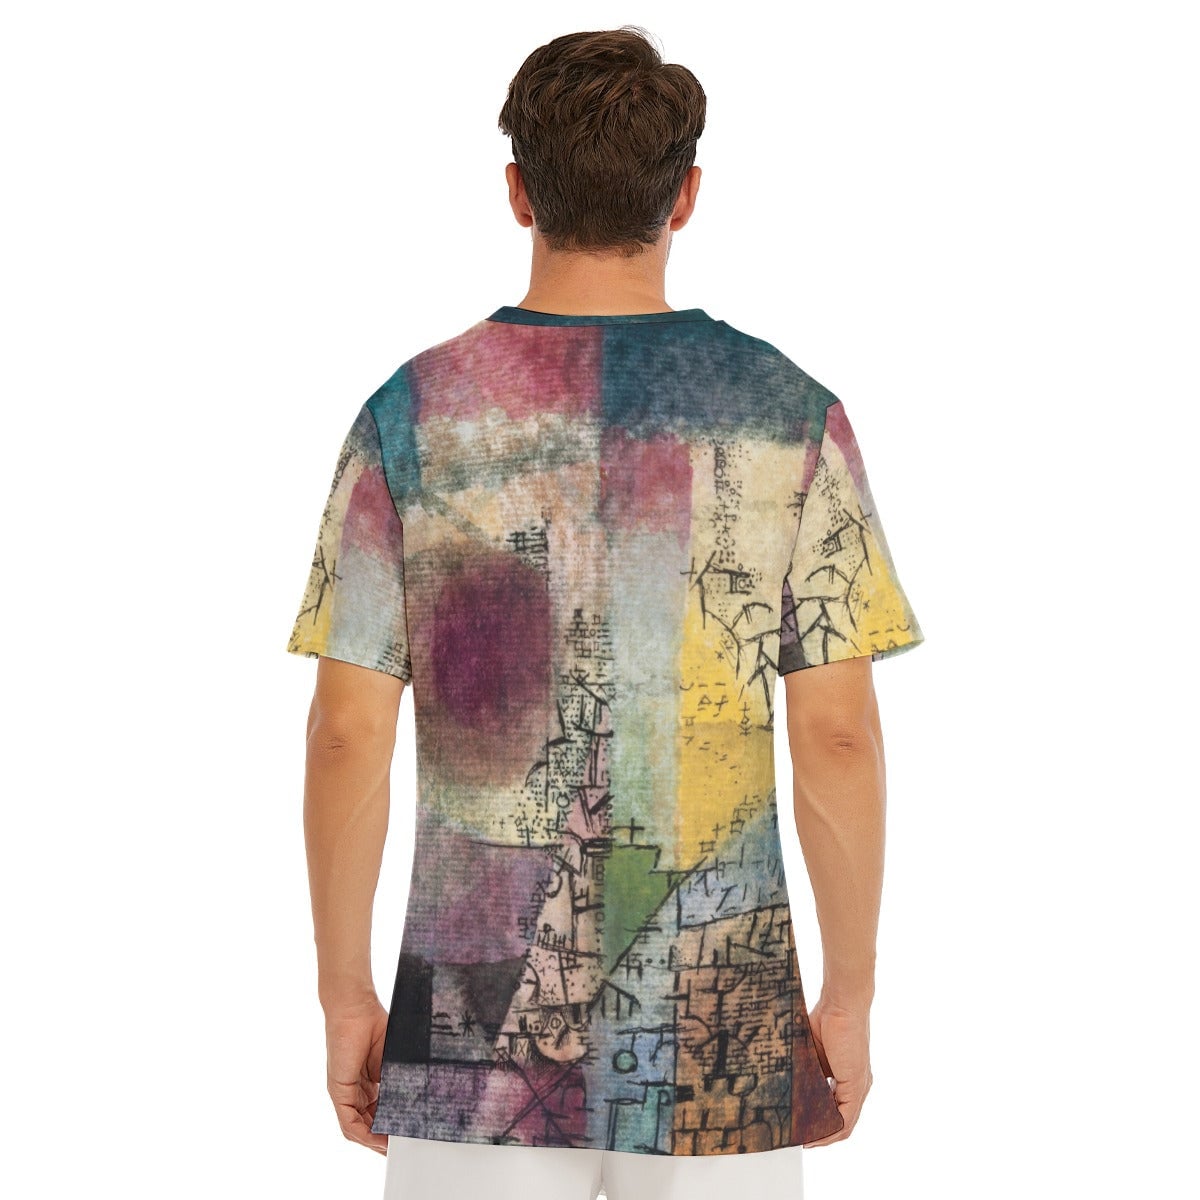 Untitled Painting Paul Klee T-Shirt - Famous Artwork Tee